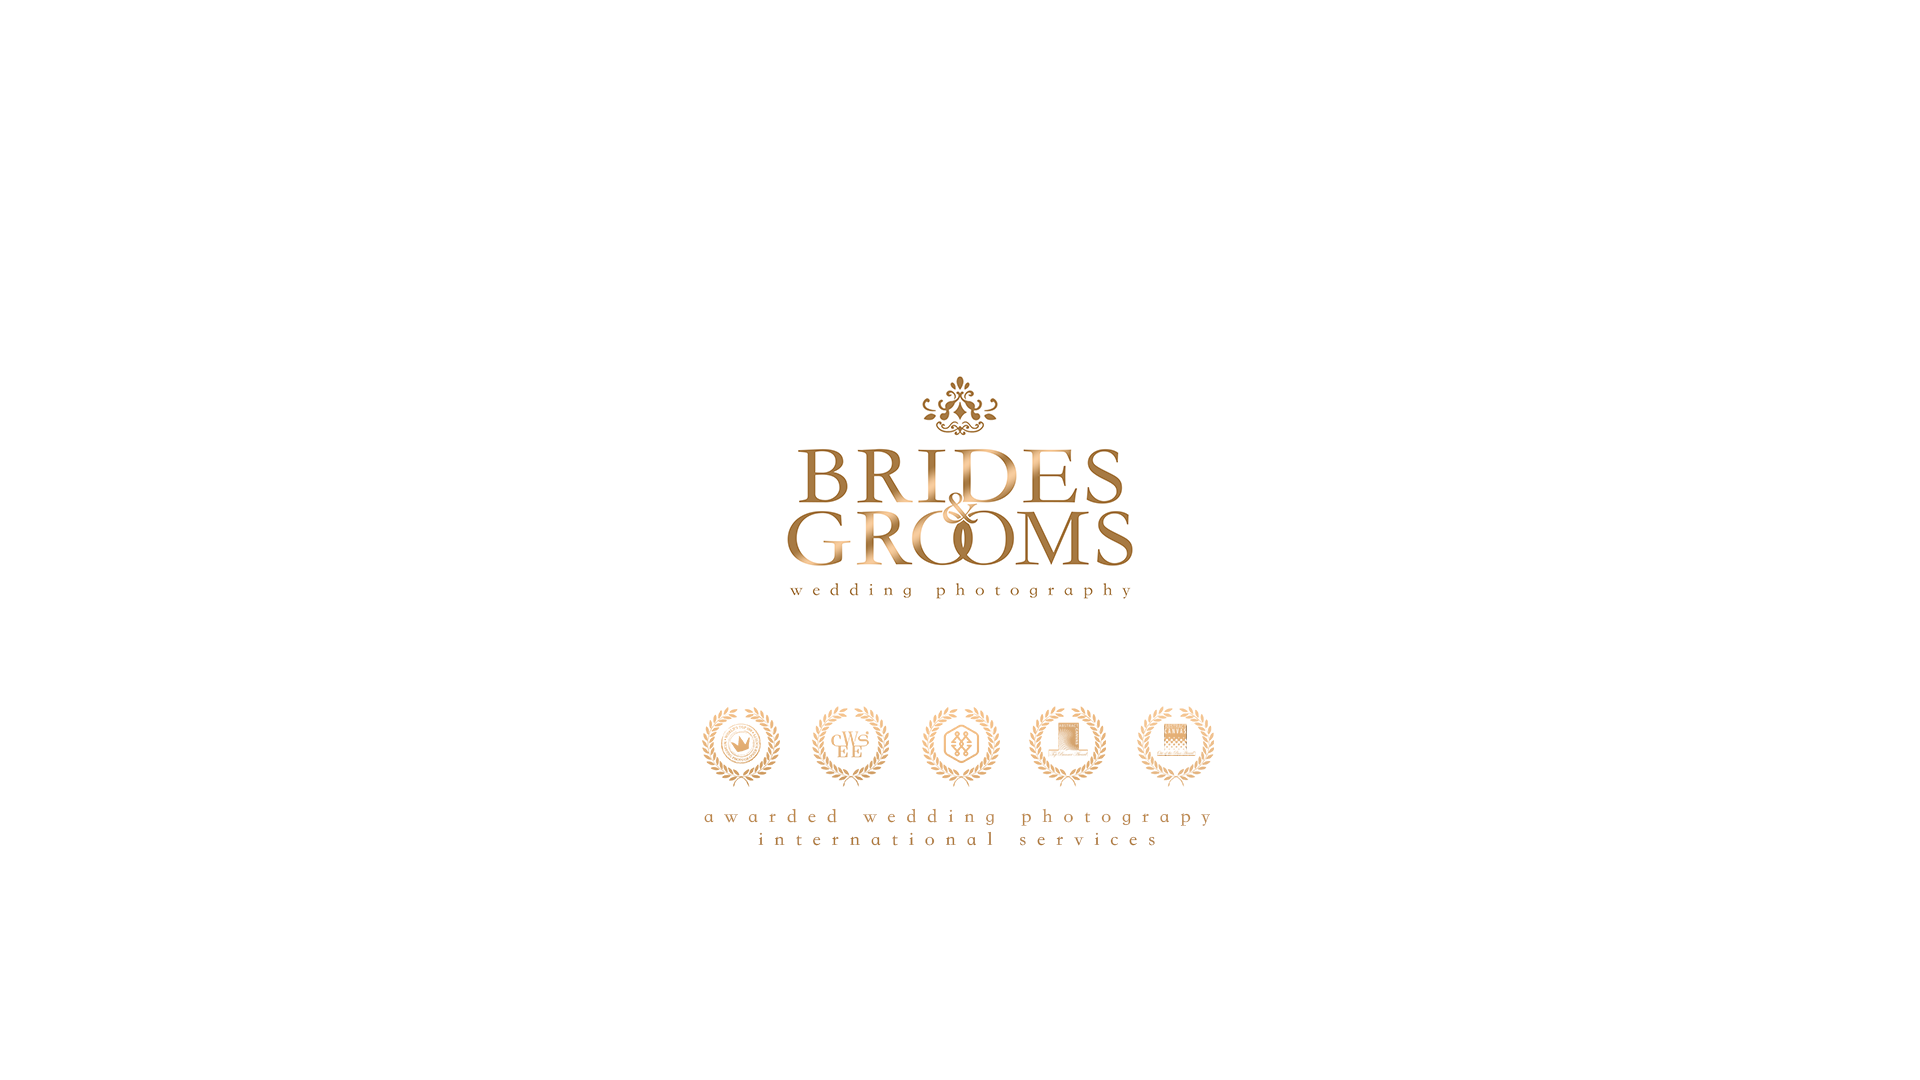 Premium Wedding Photography Services for Worldwide I Brides & Grooms - Wedding Photography